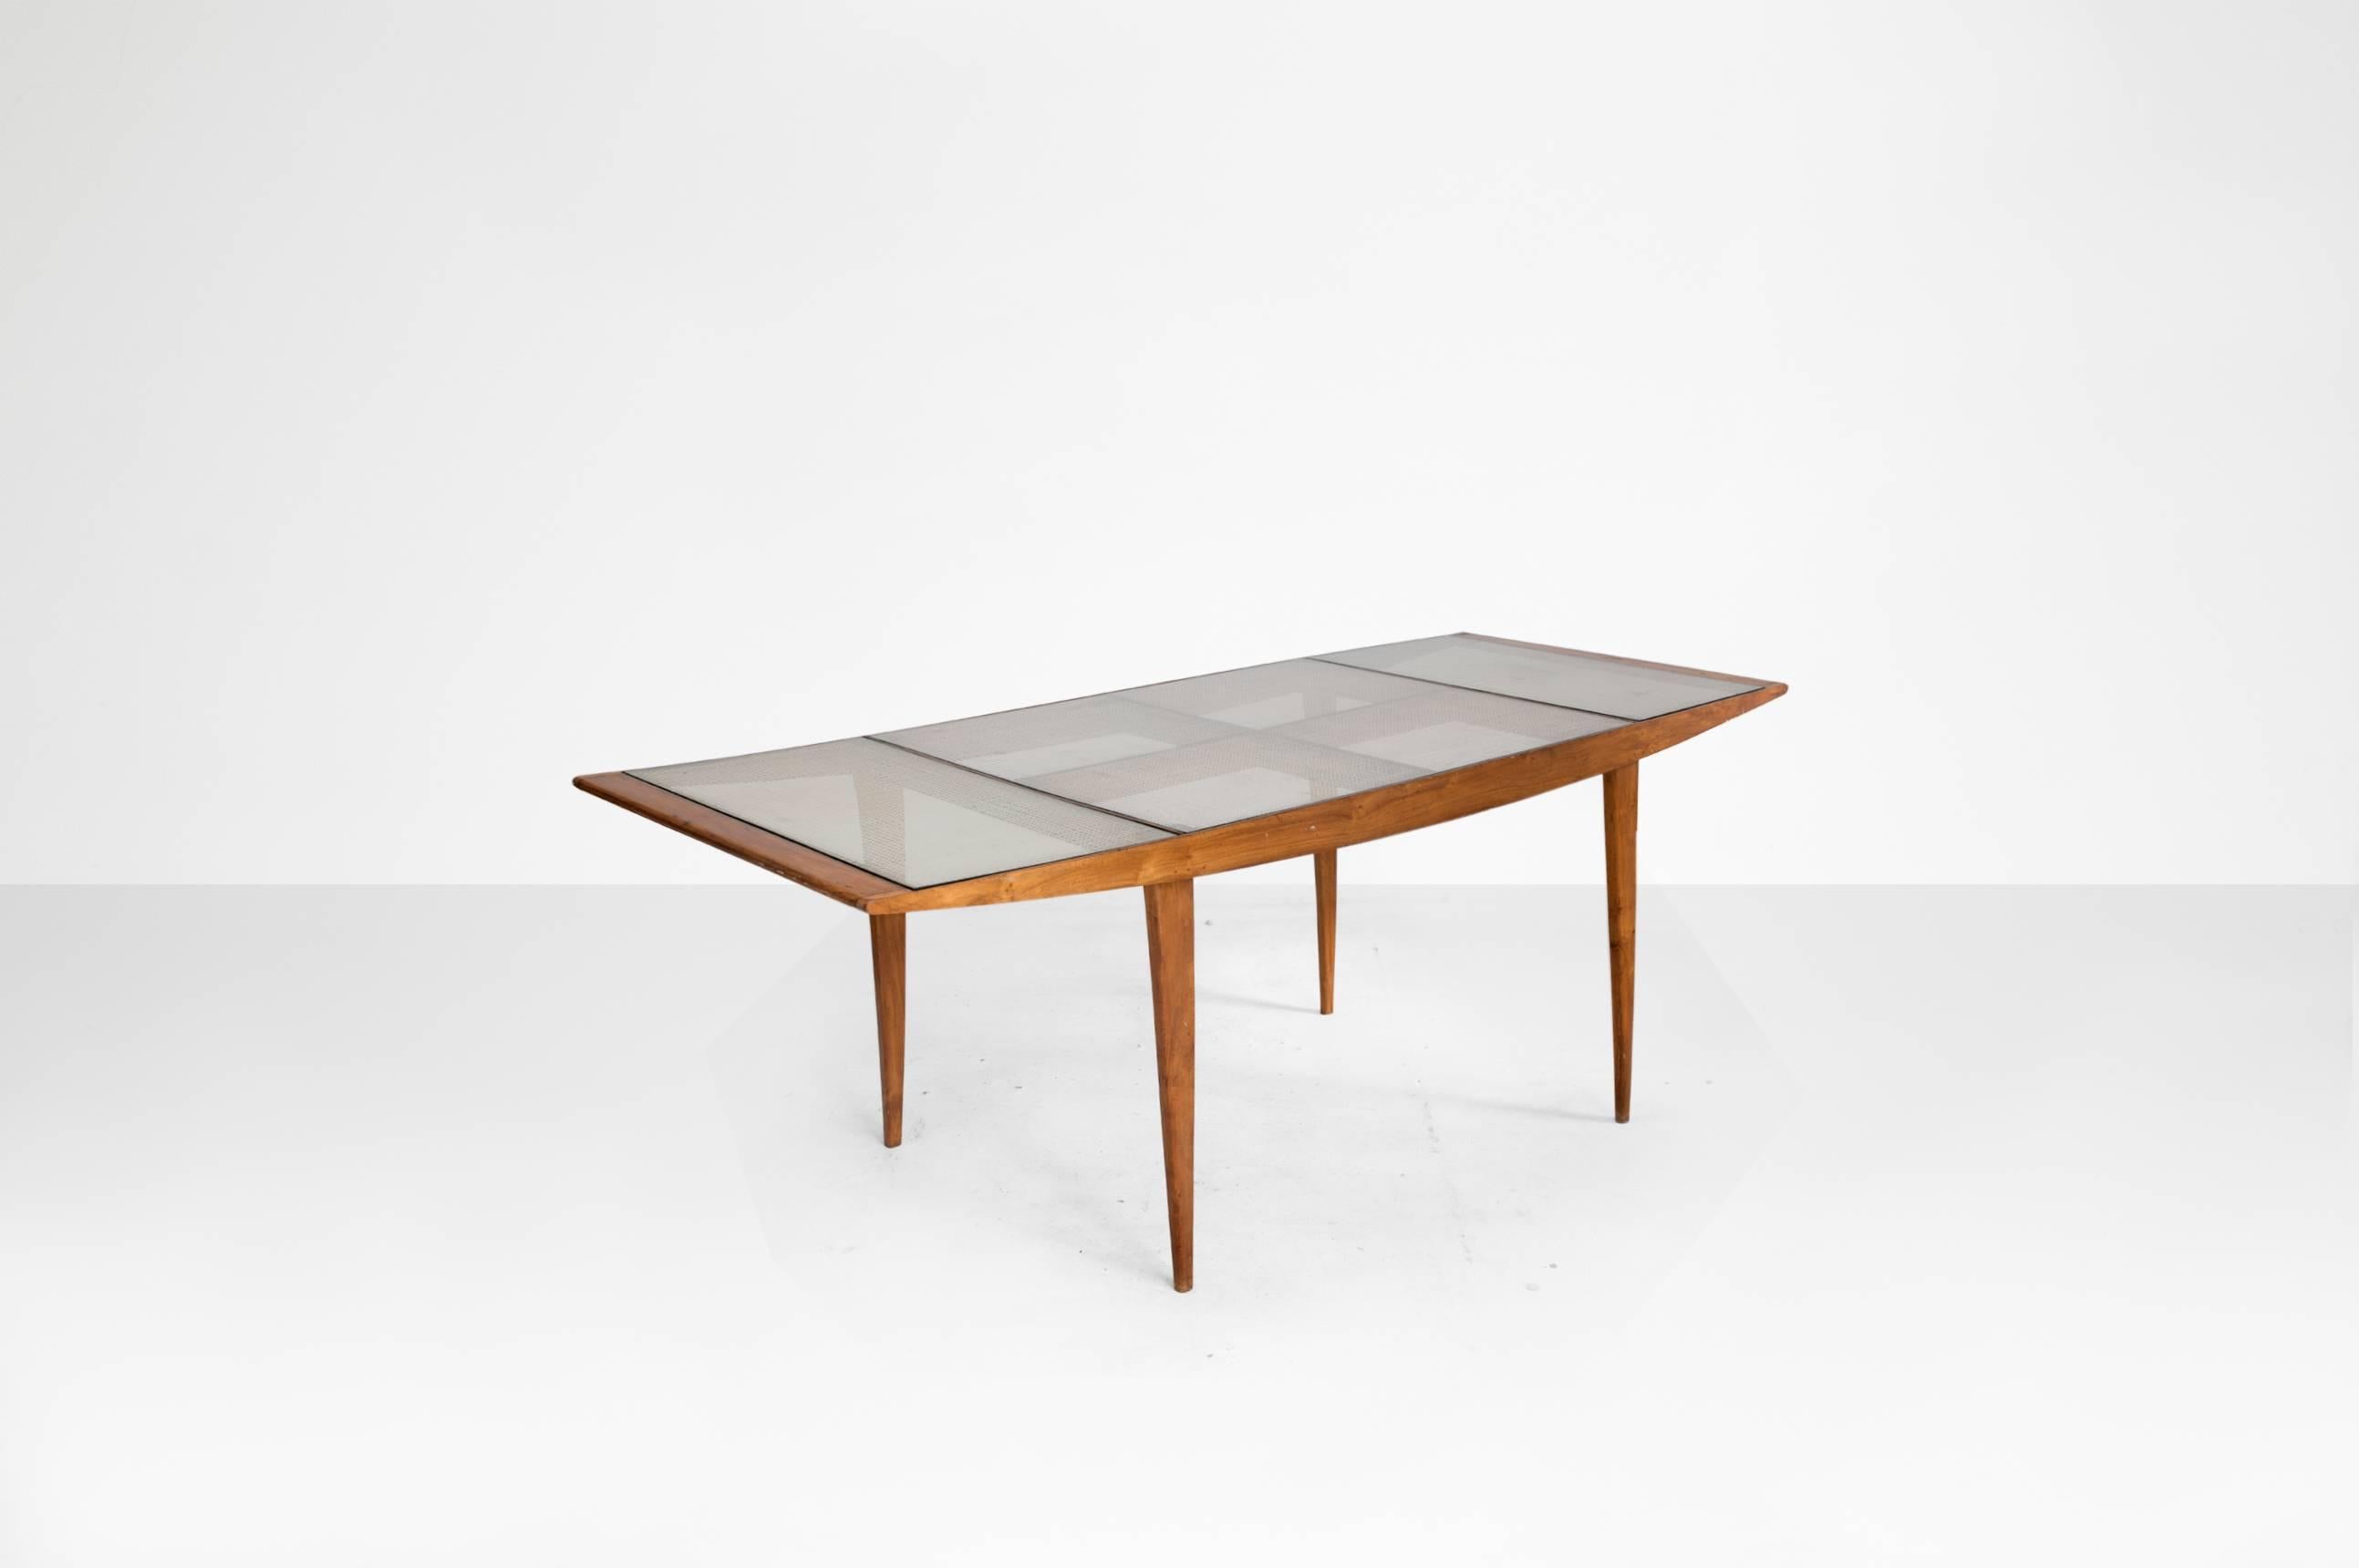 Martin Eisler (1913-1977) & Carlos Hauner (1927-1997)

Dining table
Manufactured by Forma Moveis
Brazil, 1950
Caviuna wood, cane, glass top

Measurements
220 cm x 89 cm x 74 H cm.
88,6 in x 36 in x 29.5 H in

Literature
Aric Chen, Brazil